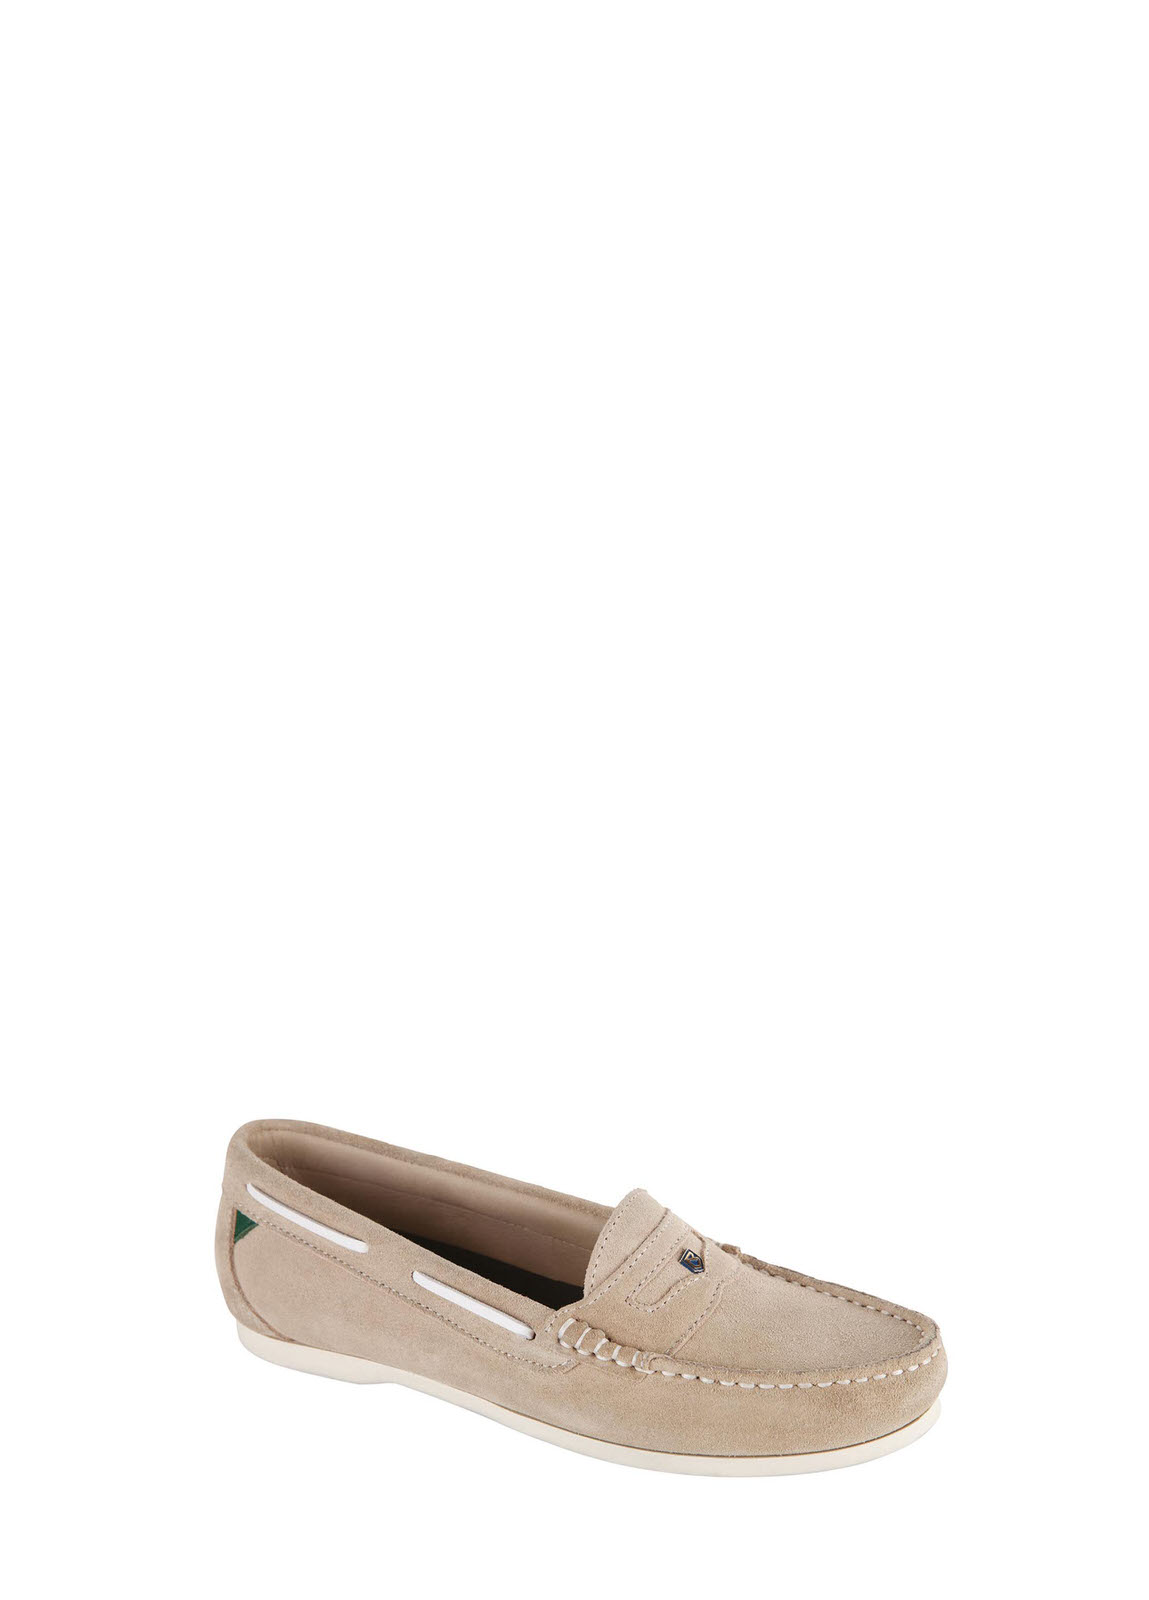 Dubarry_Menorca Moccasins - Oyster_Image_1